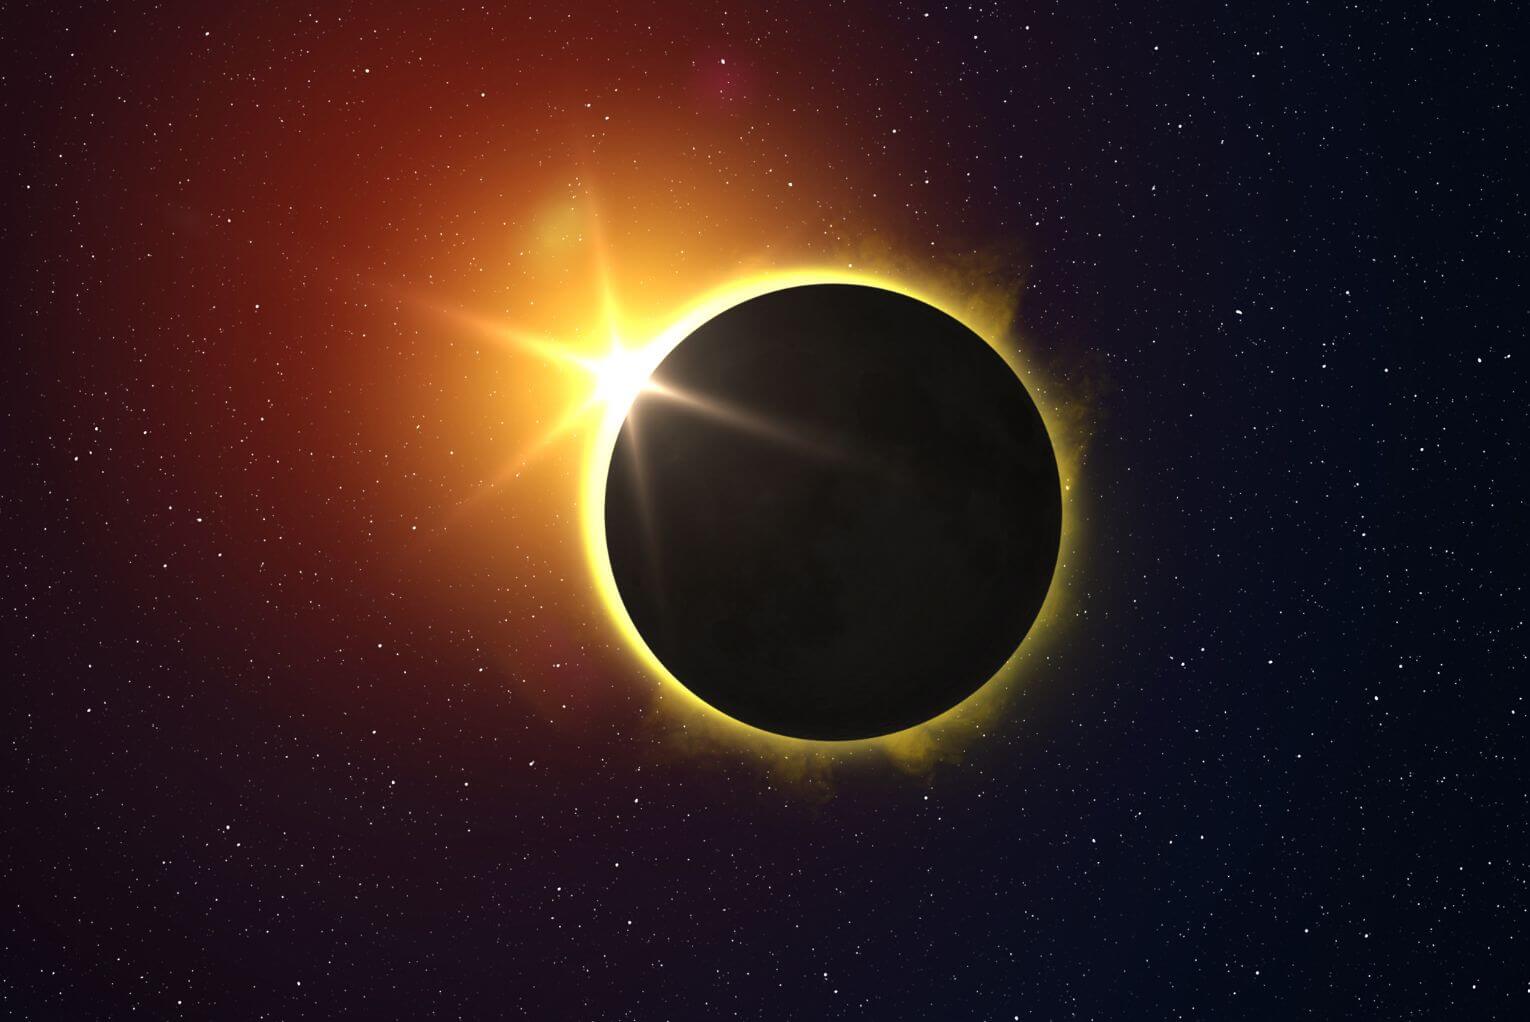 Is The Eclipse God’s Supernatural Call to Repentance?